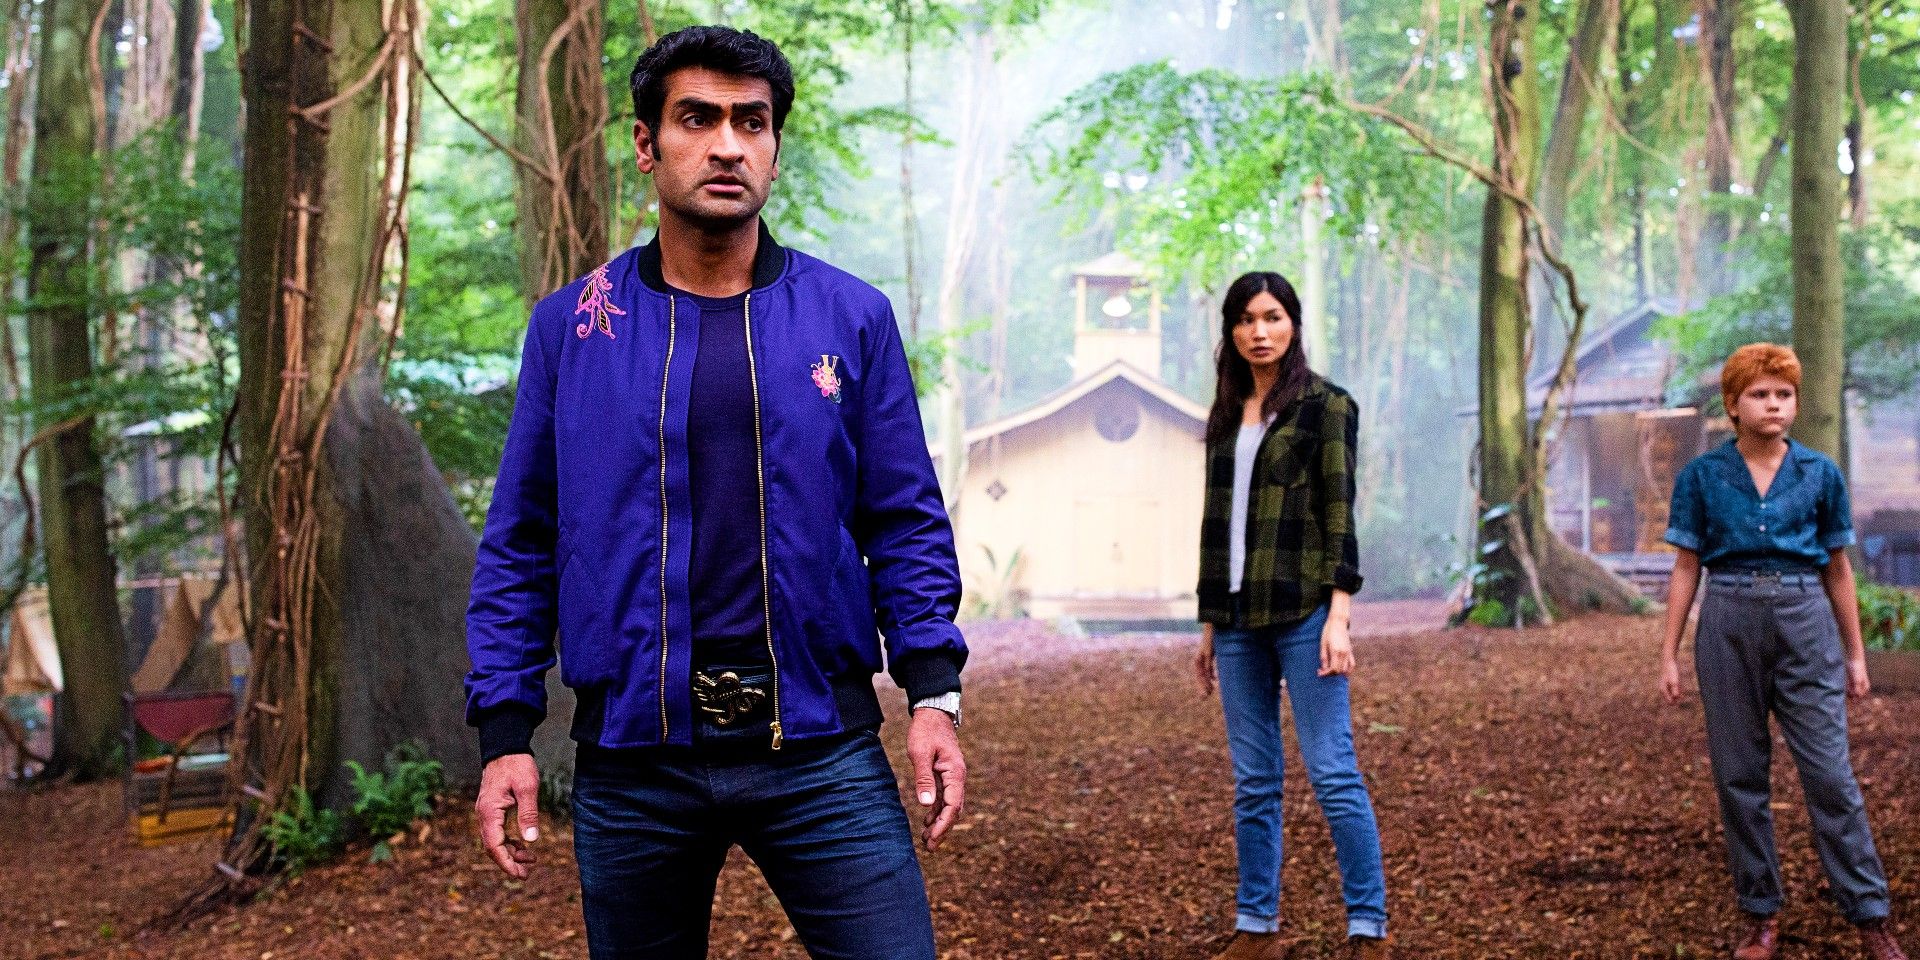 Kumail Nanjiani and Gemma Chan in the woods in Eternals